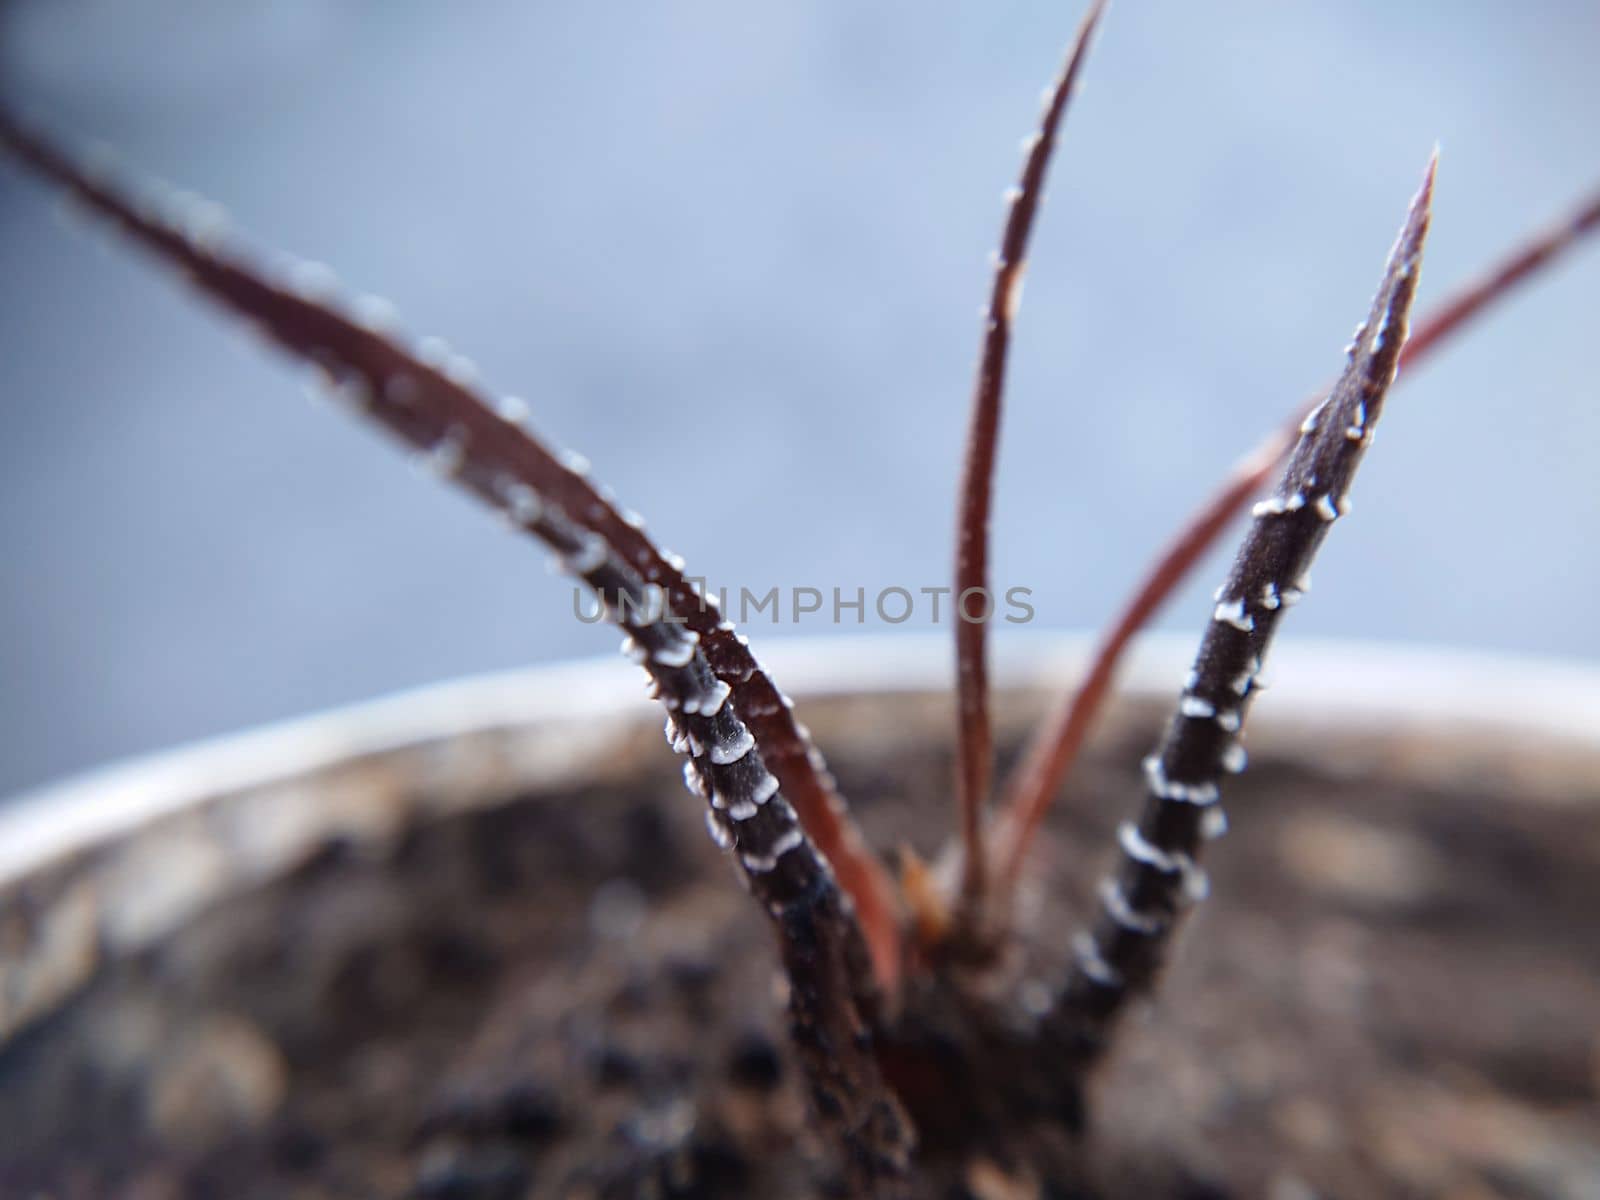 Macrophotography.Protruding withered tendrils of a purple plant in a pot.Texture or background.Selective focus.